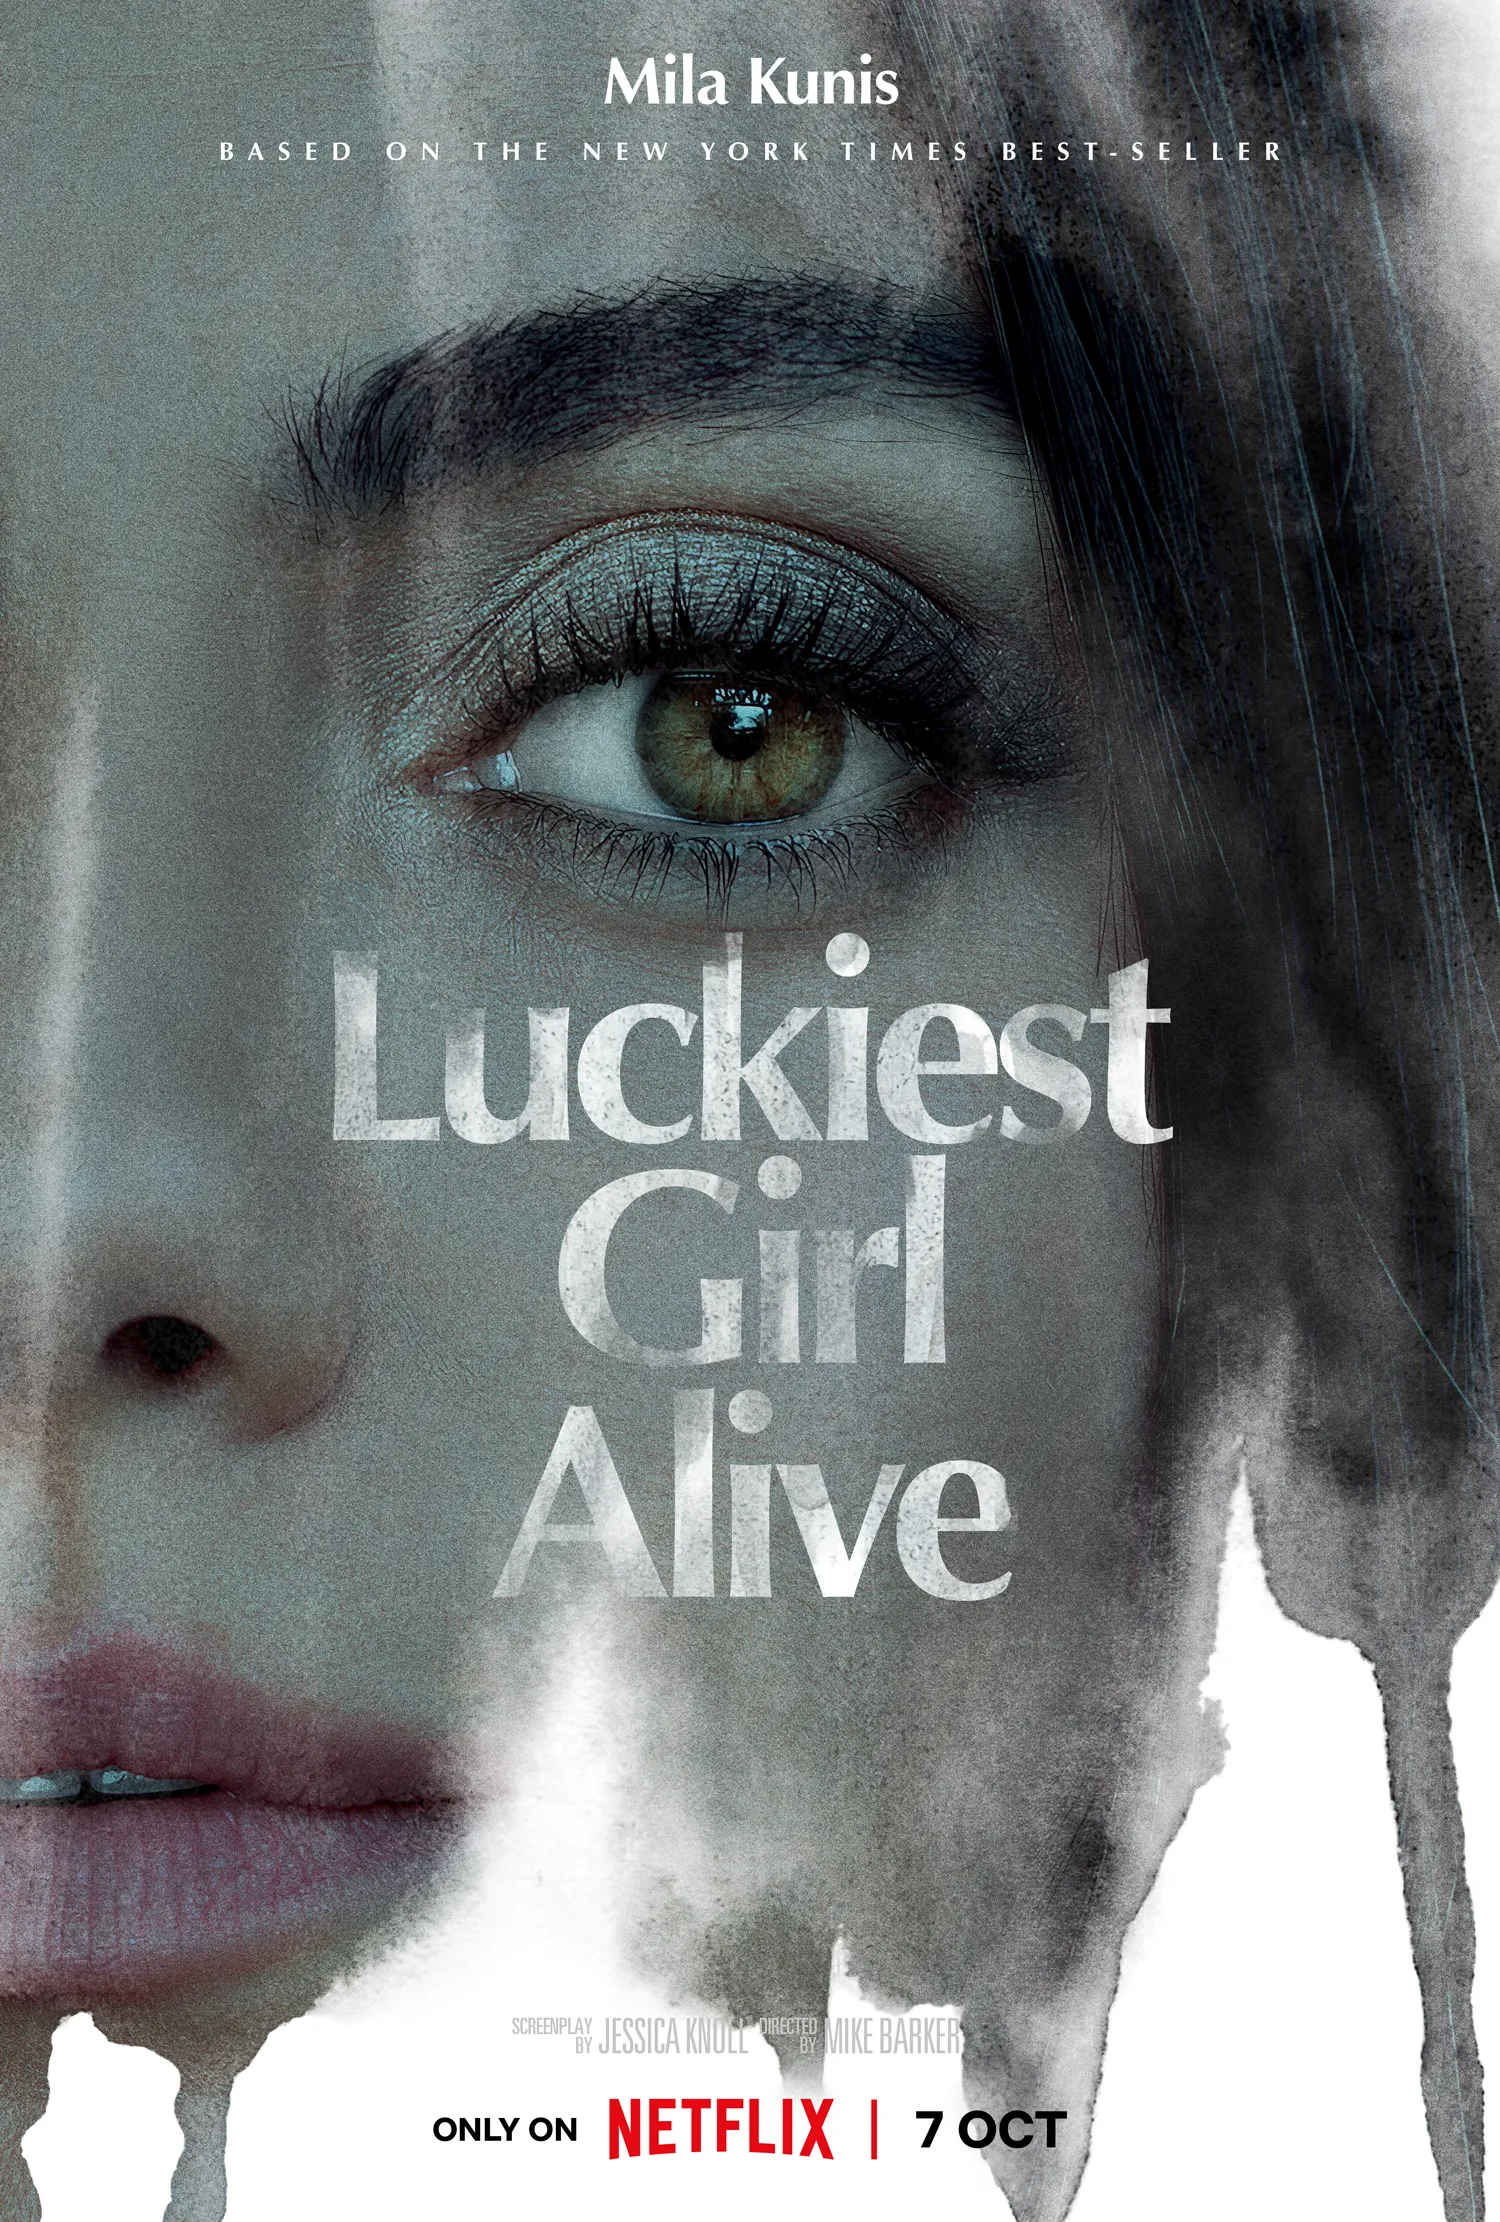 'Luckiest Girl Alive' Reveals Official Trailer and Poster, Coming to Netflix Oct. 7 | FMV6